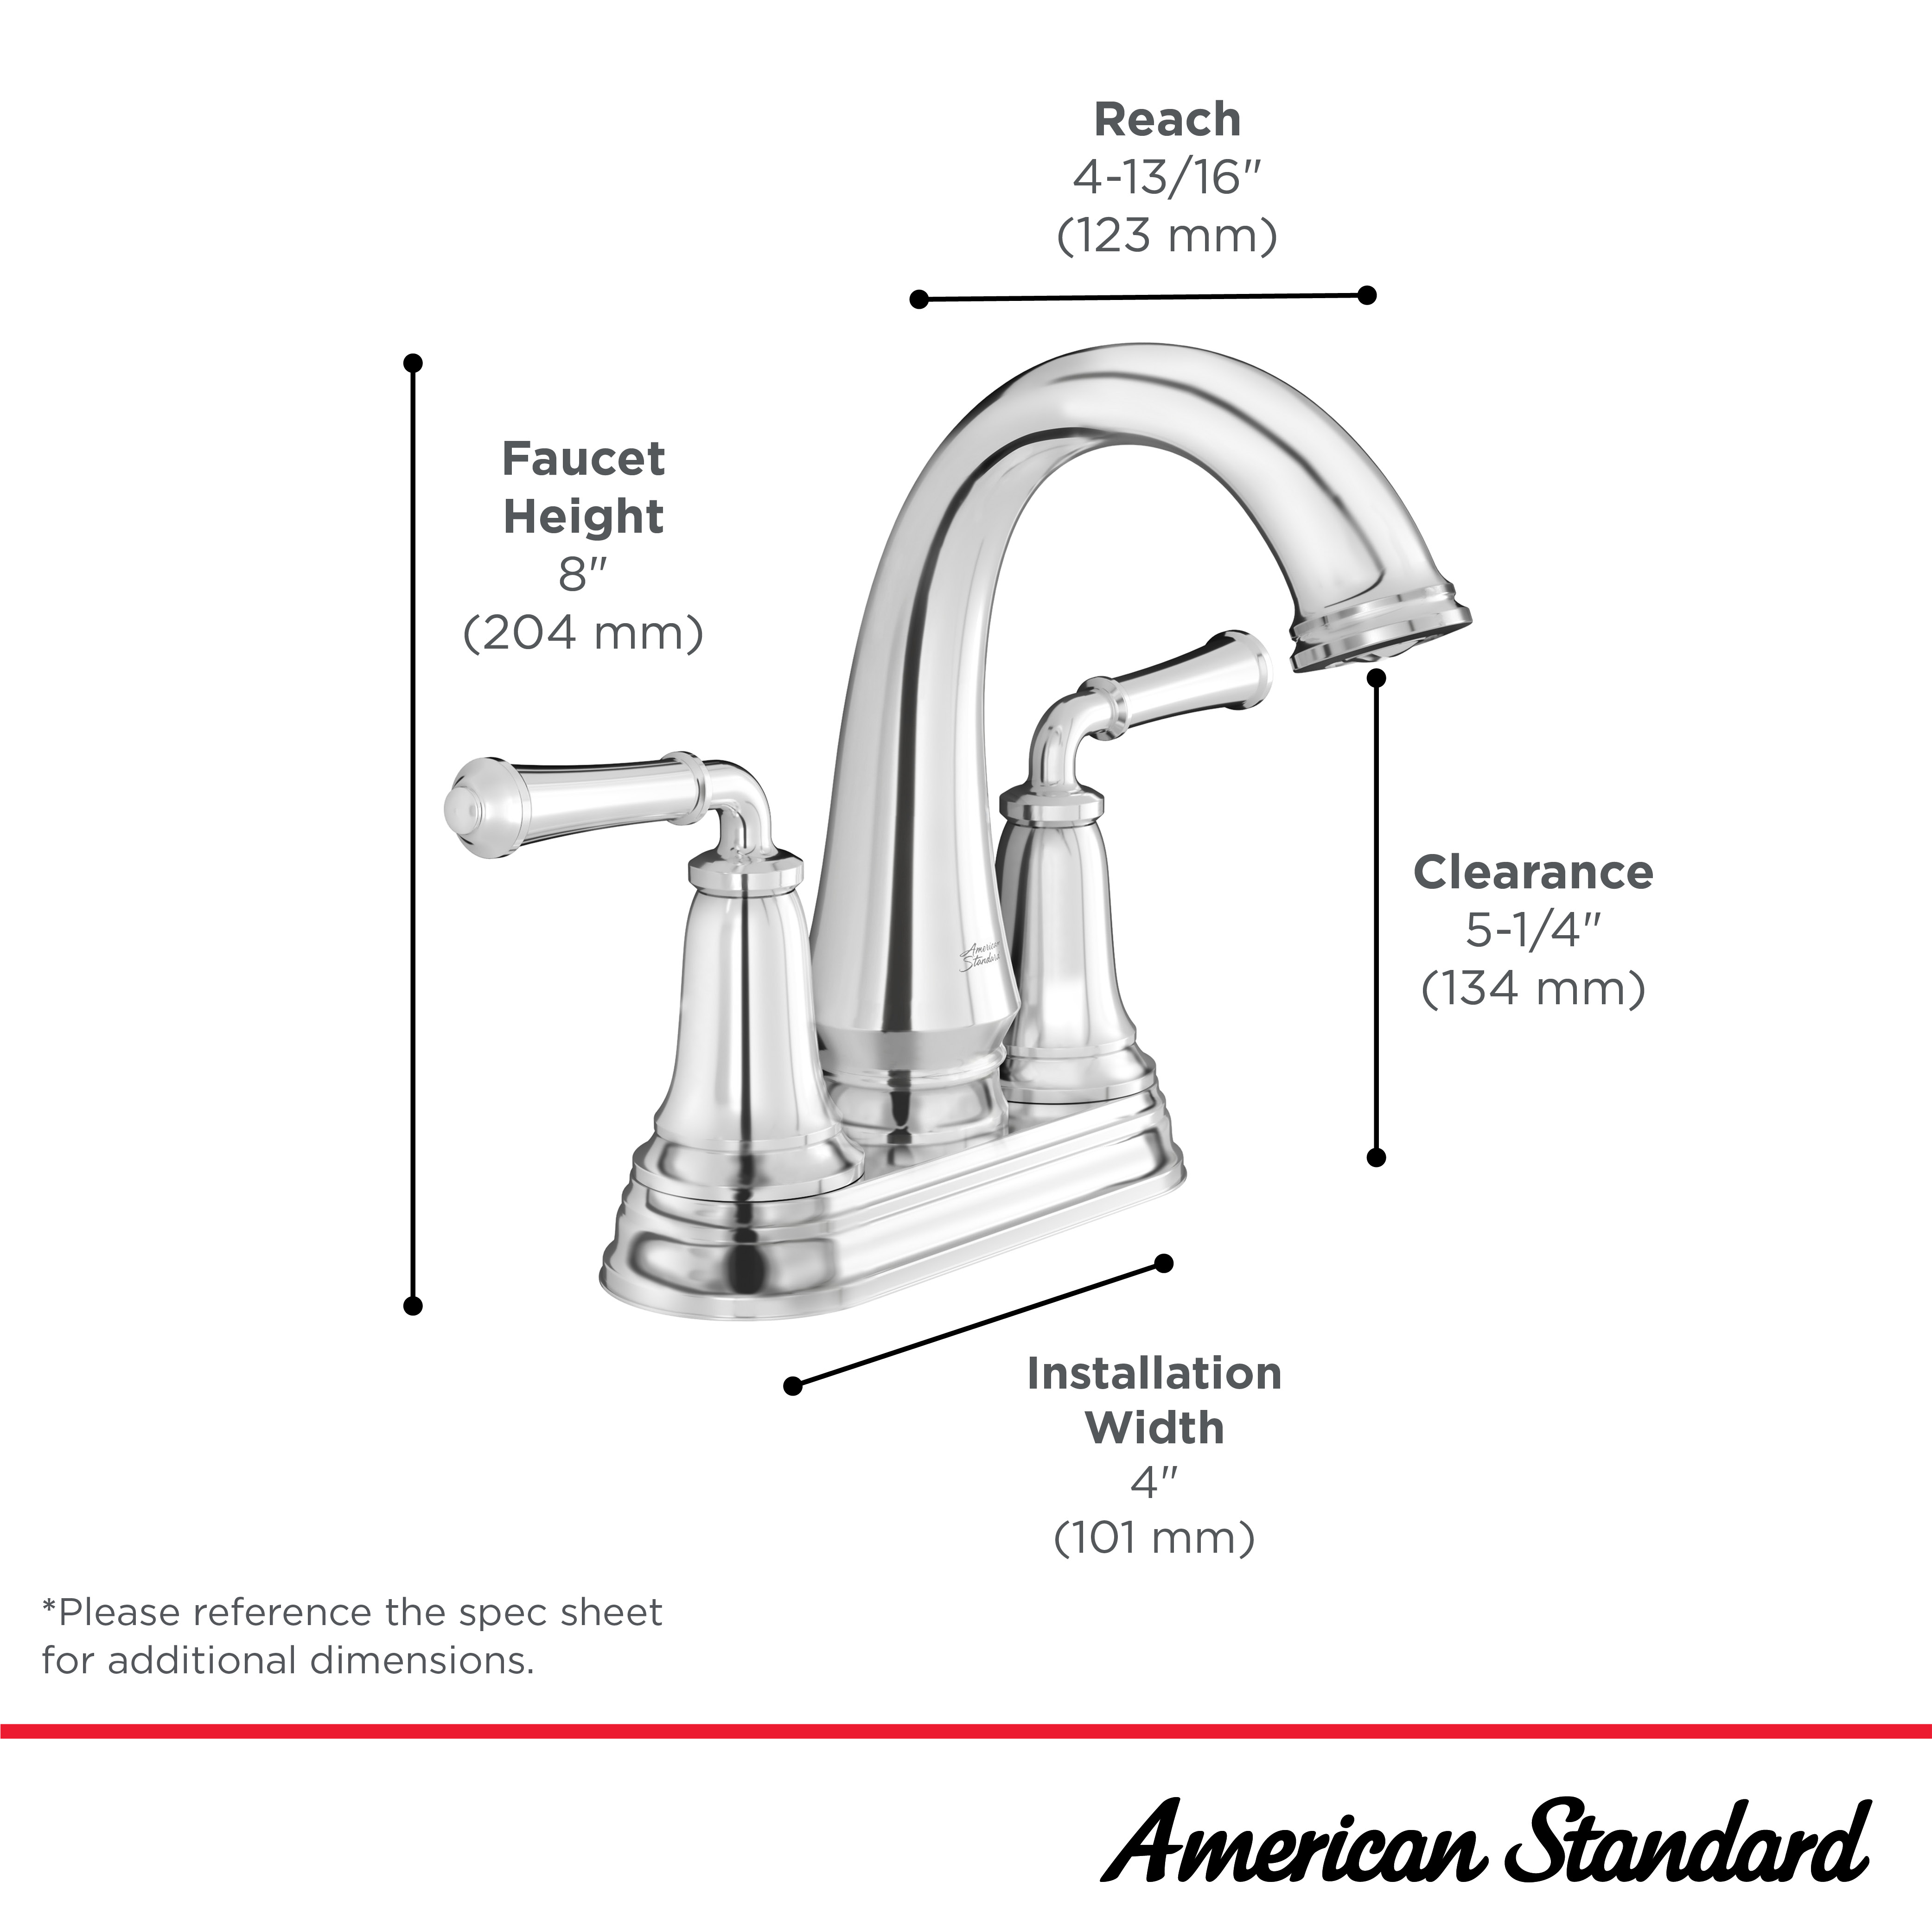 Delancey® 4-Inch Centerset 2-Handle Bathroom Faucet 1.2gpm/4.5 L/min With Lever Handles